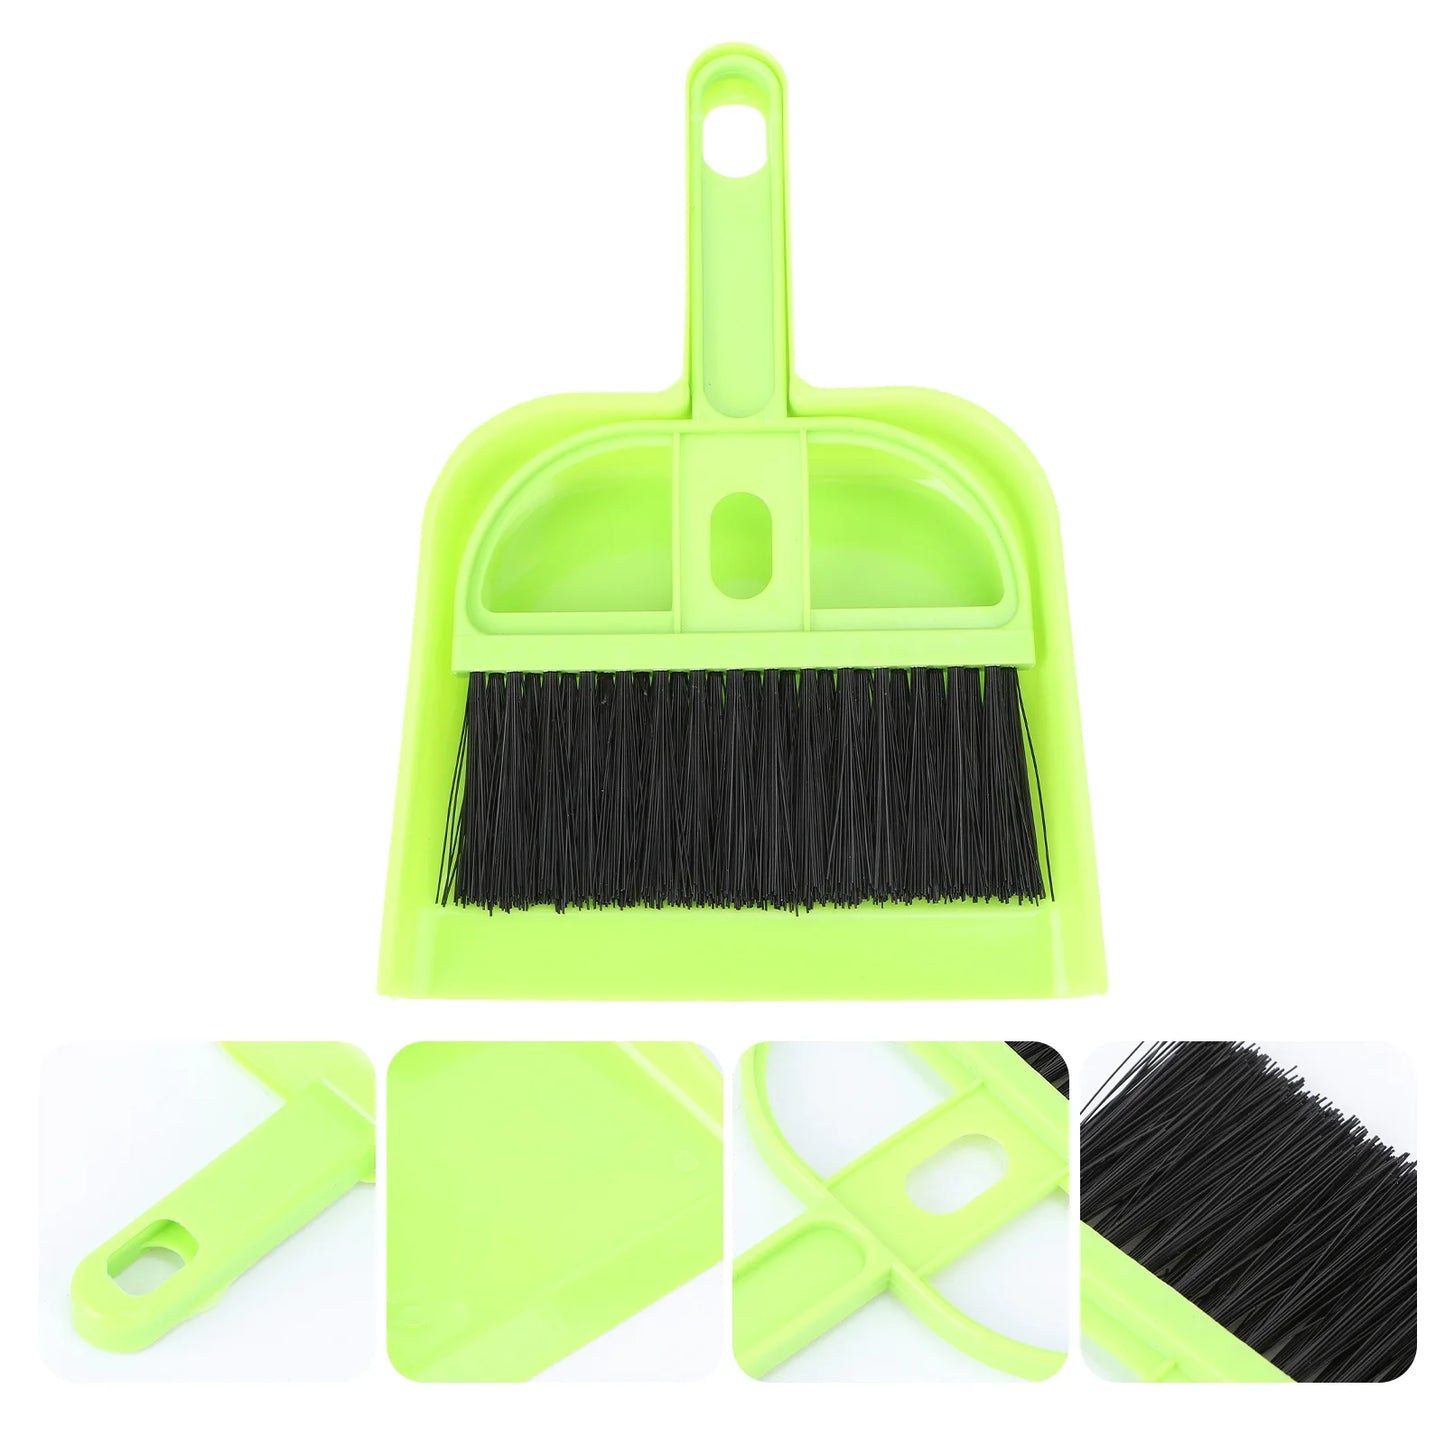 Mini Dustpan and Brush Set: A Must-Have for Small Pet Owners